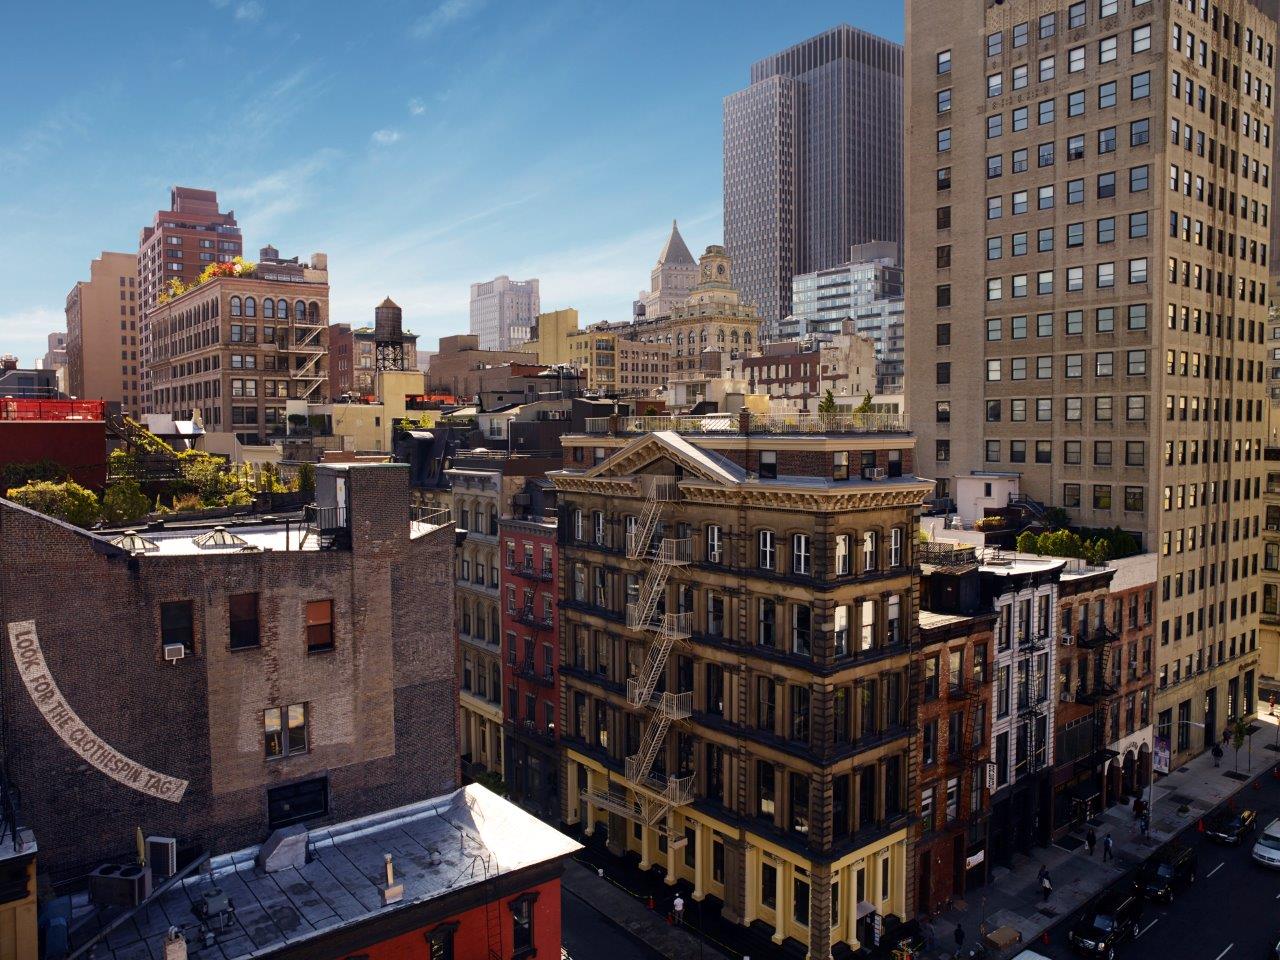 View of the Tribeca neighborhood from the rooftop